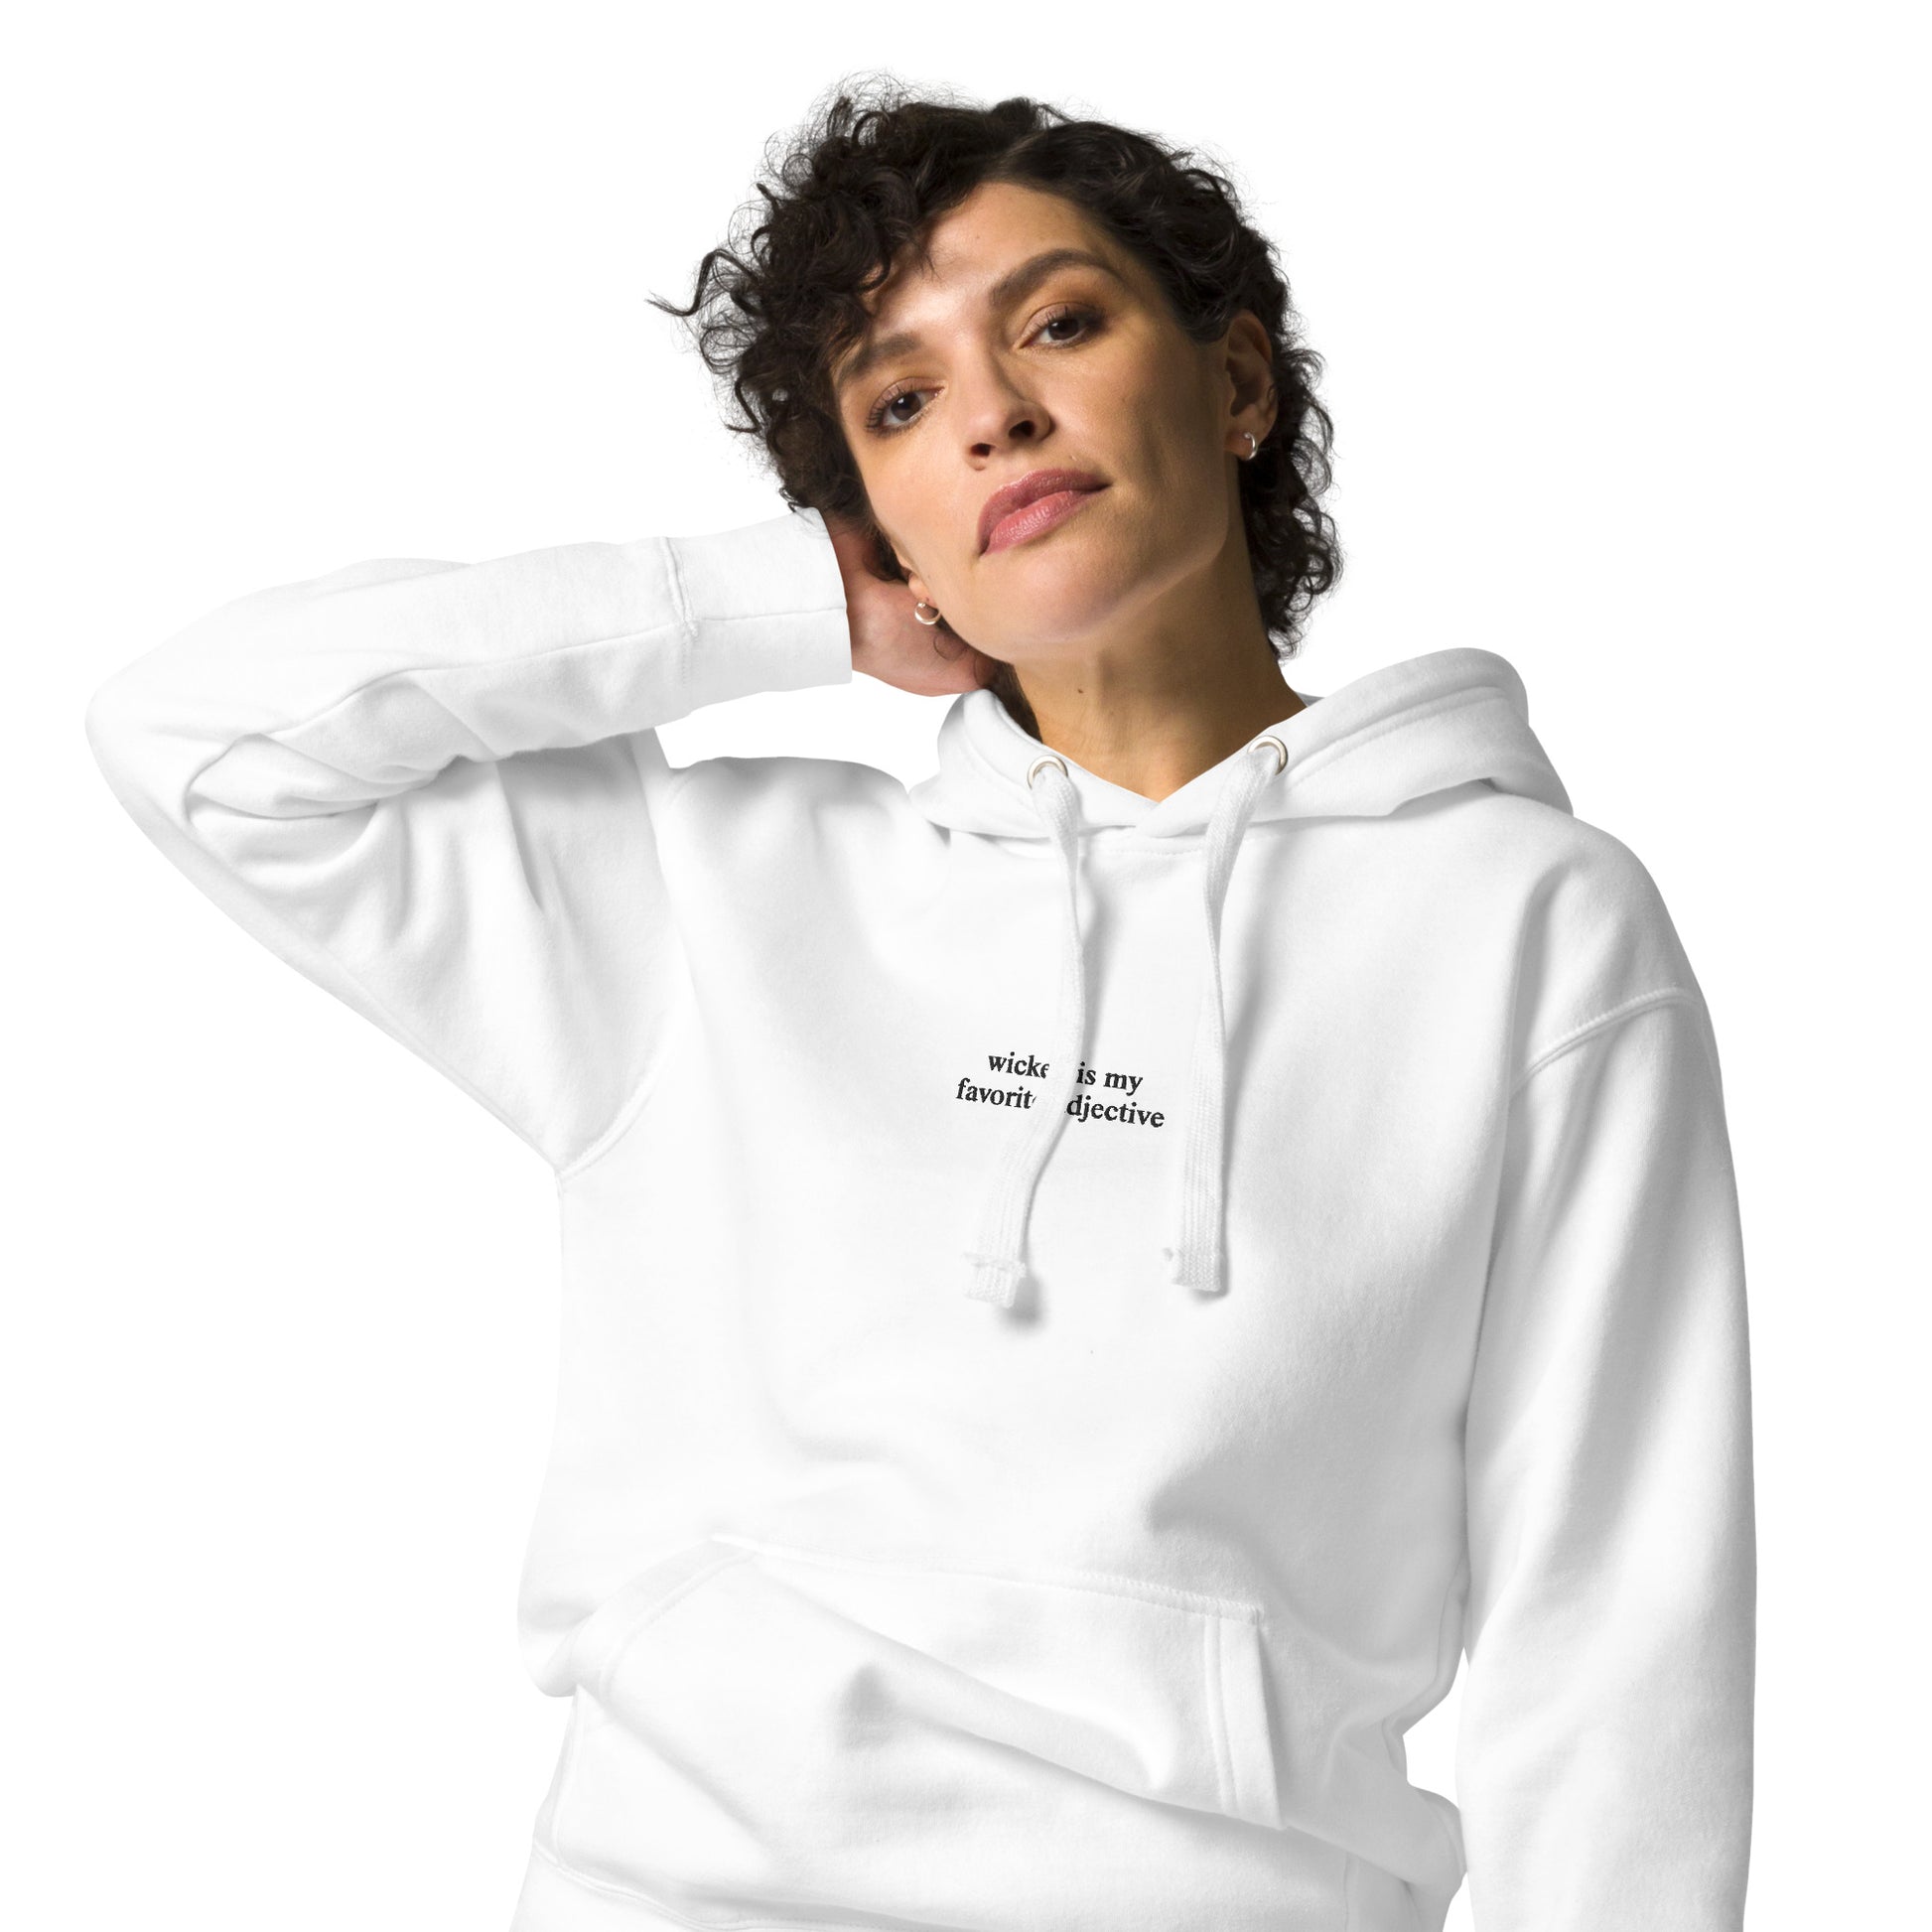 woman wearing white hoodie that says "wicked is my favorite adjective" in black embroidery